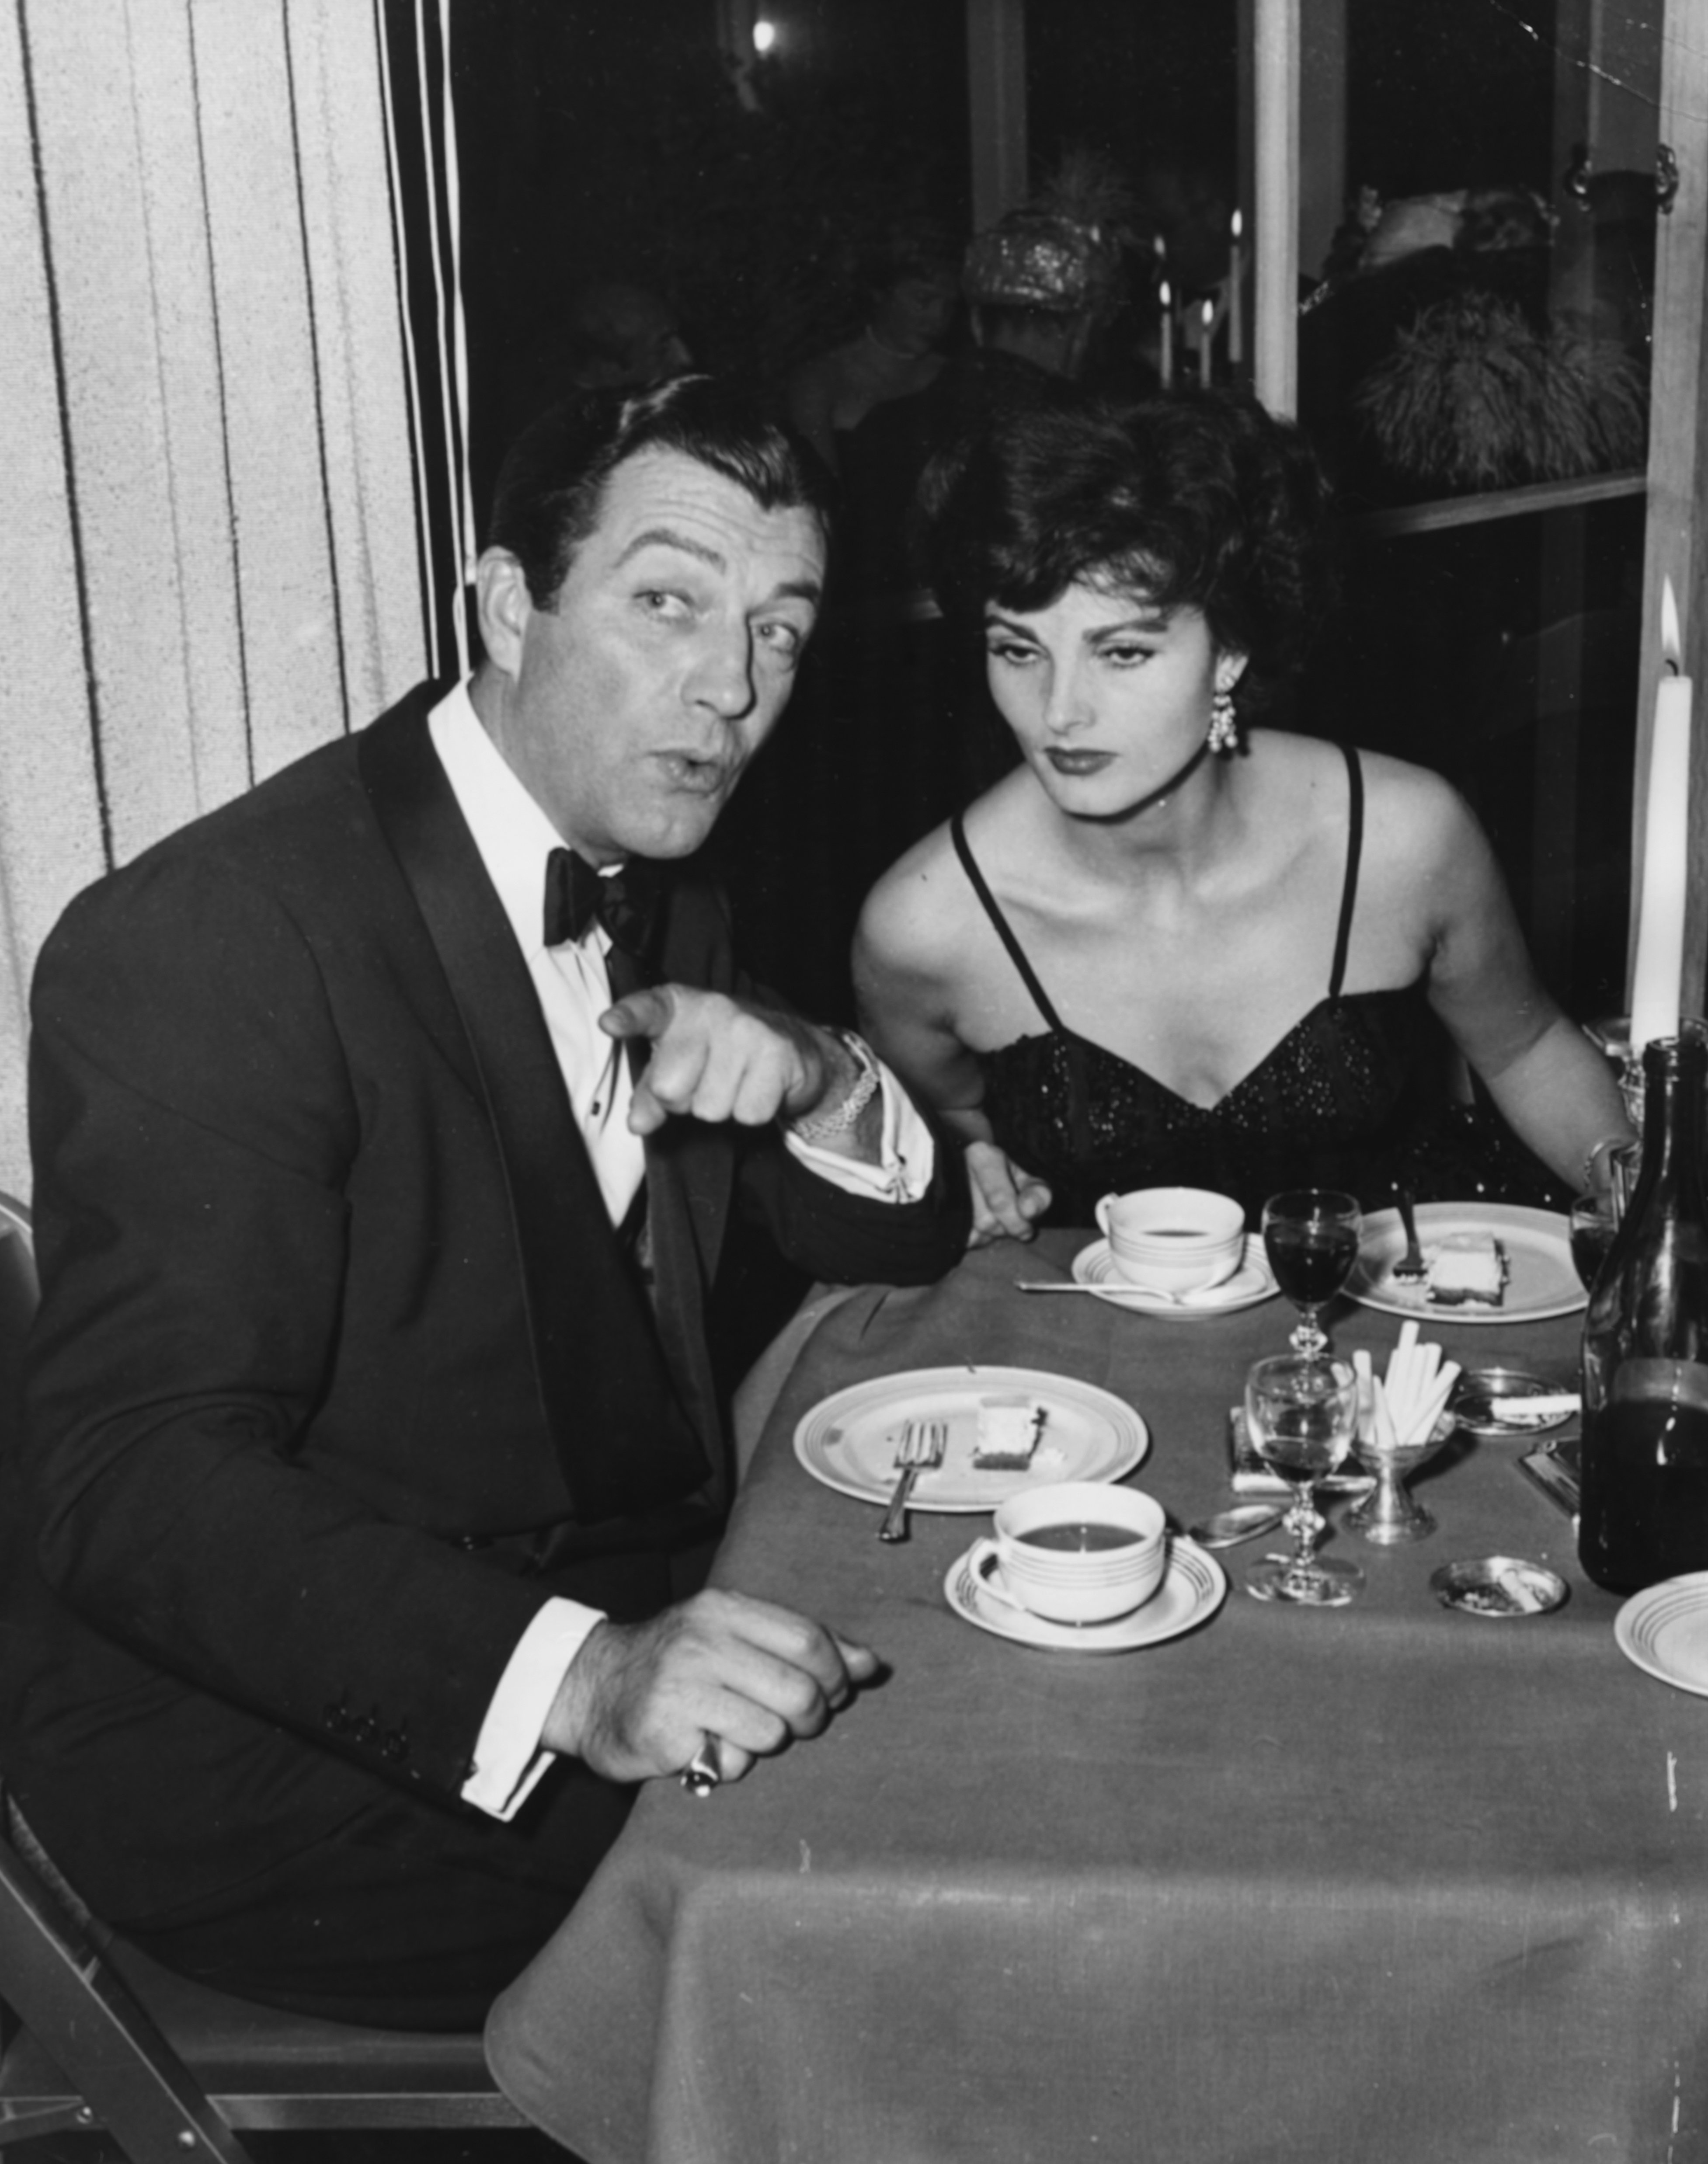 Actor Robert Taylor and his wife Ursula Thiess eating cheesecake and drinking coffee after dinner together in Hollywood, March 12th 1954.  | Source: Getty Images